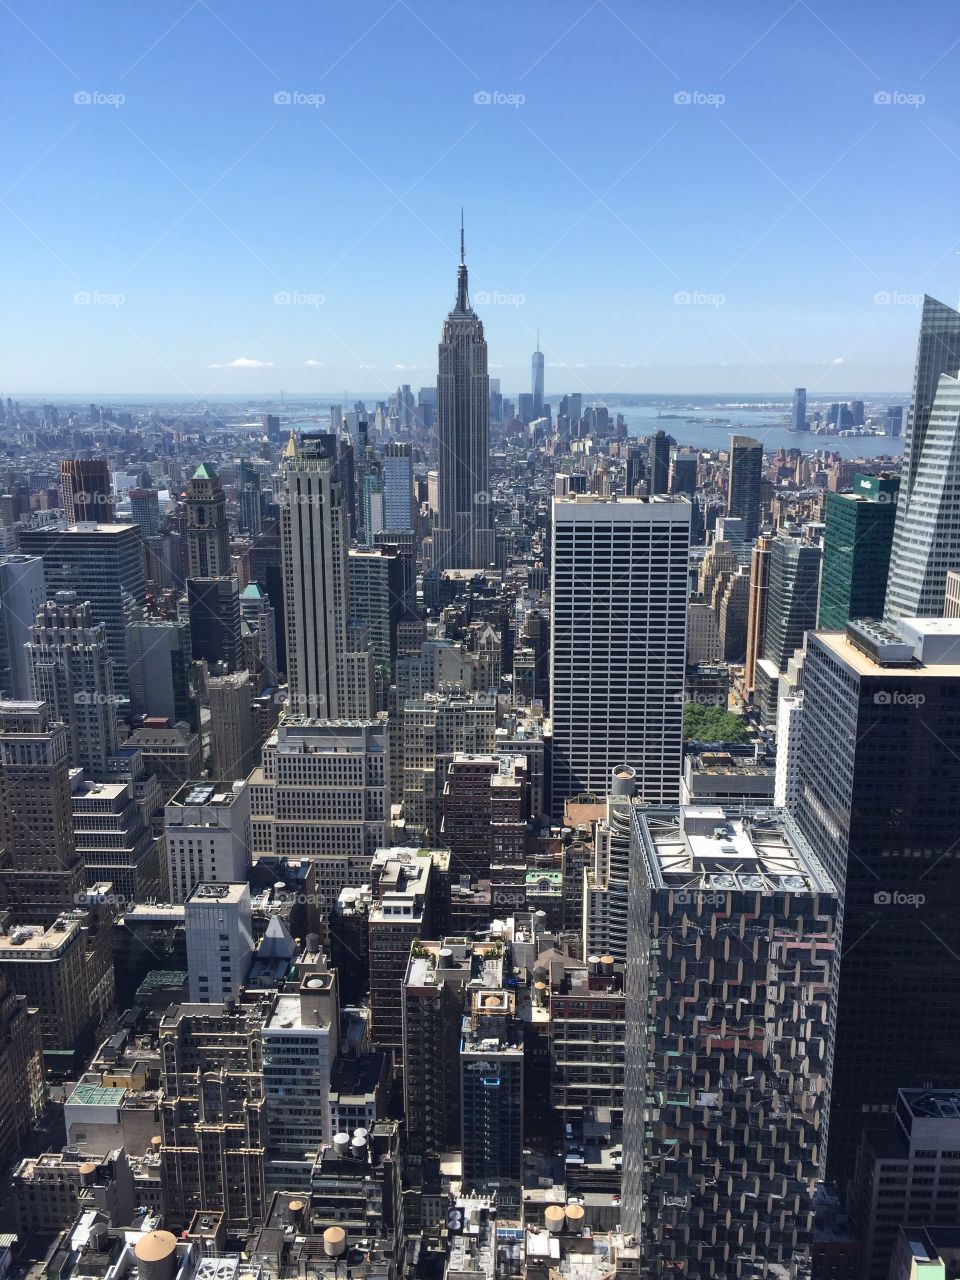 Top of the Rock - NYC